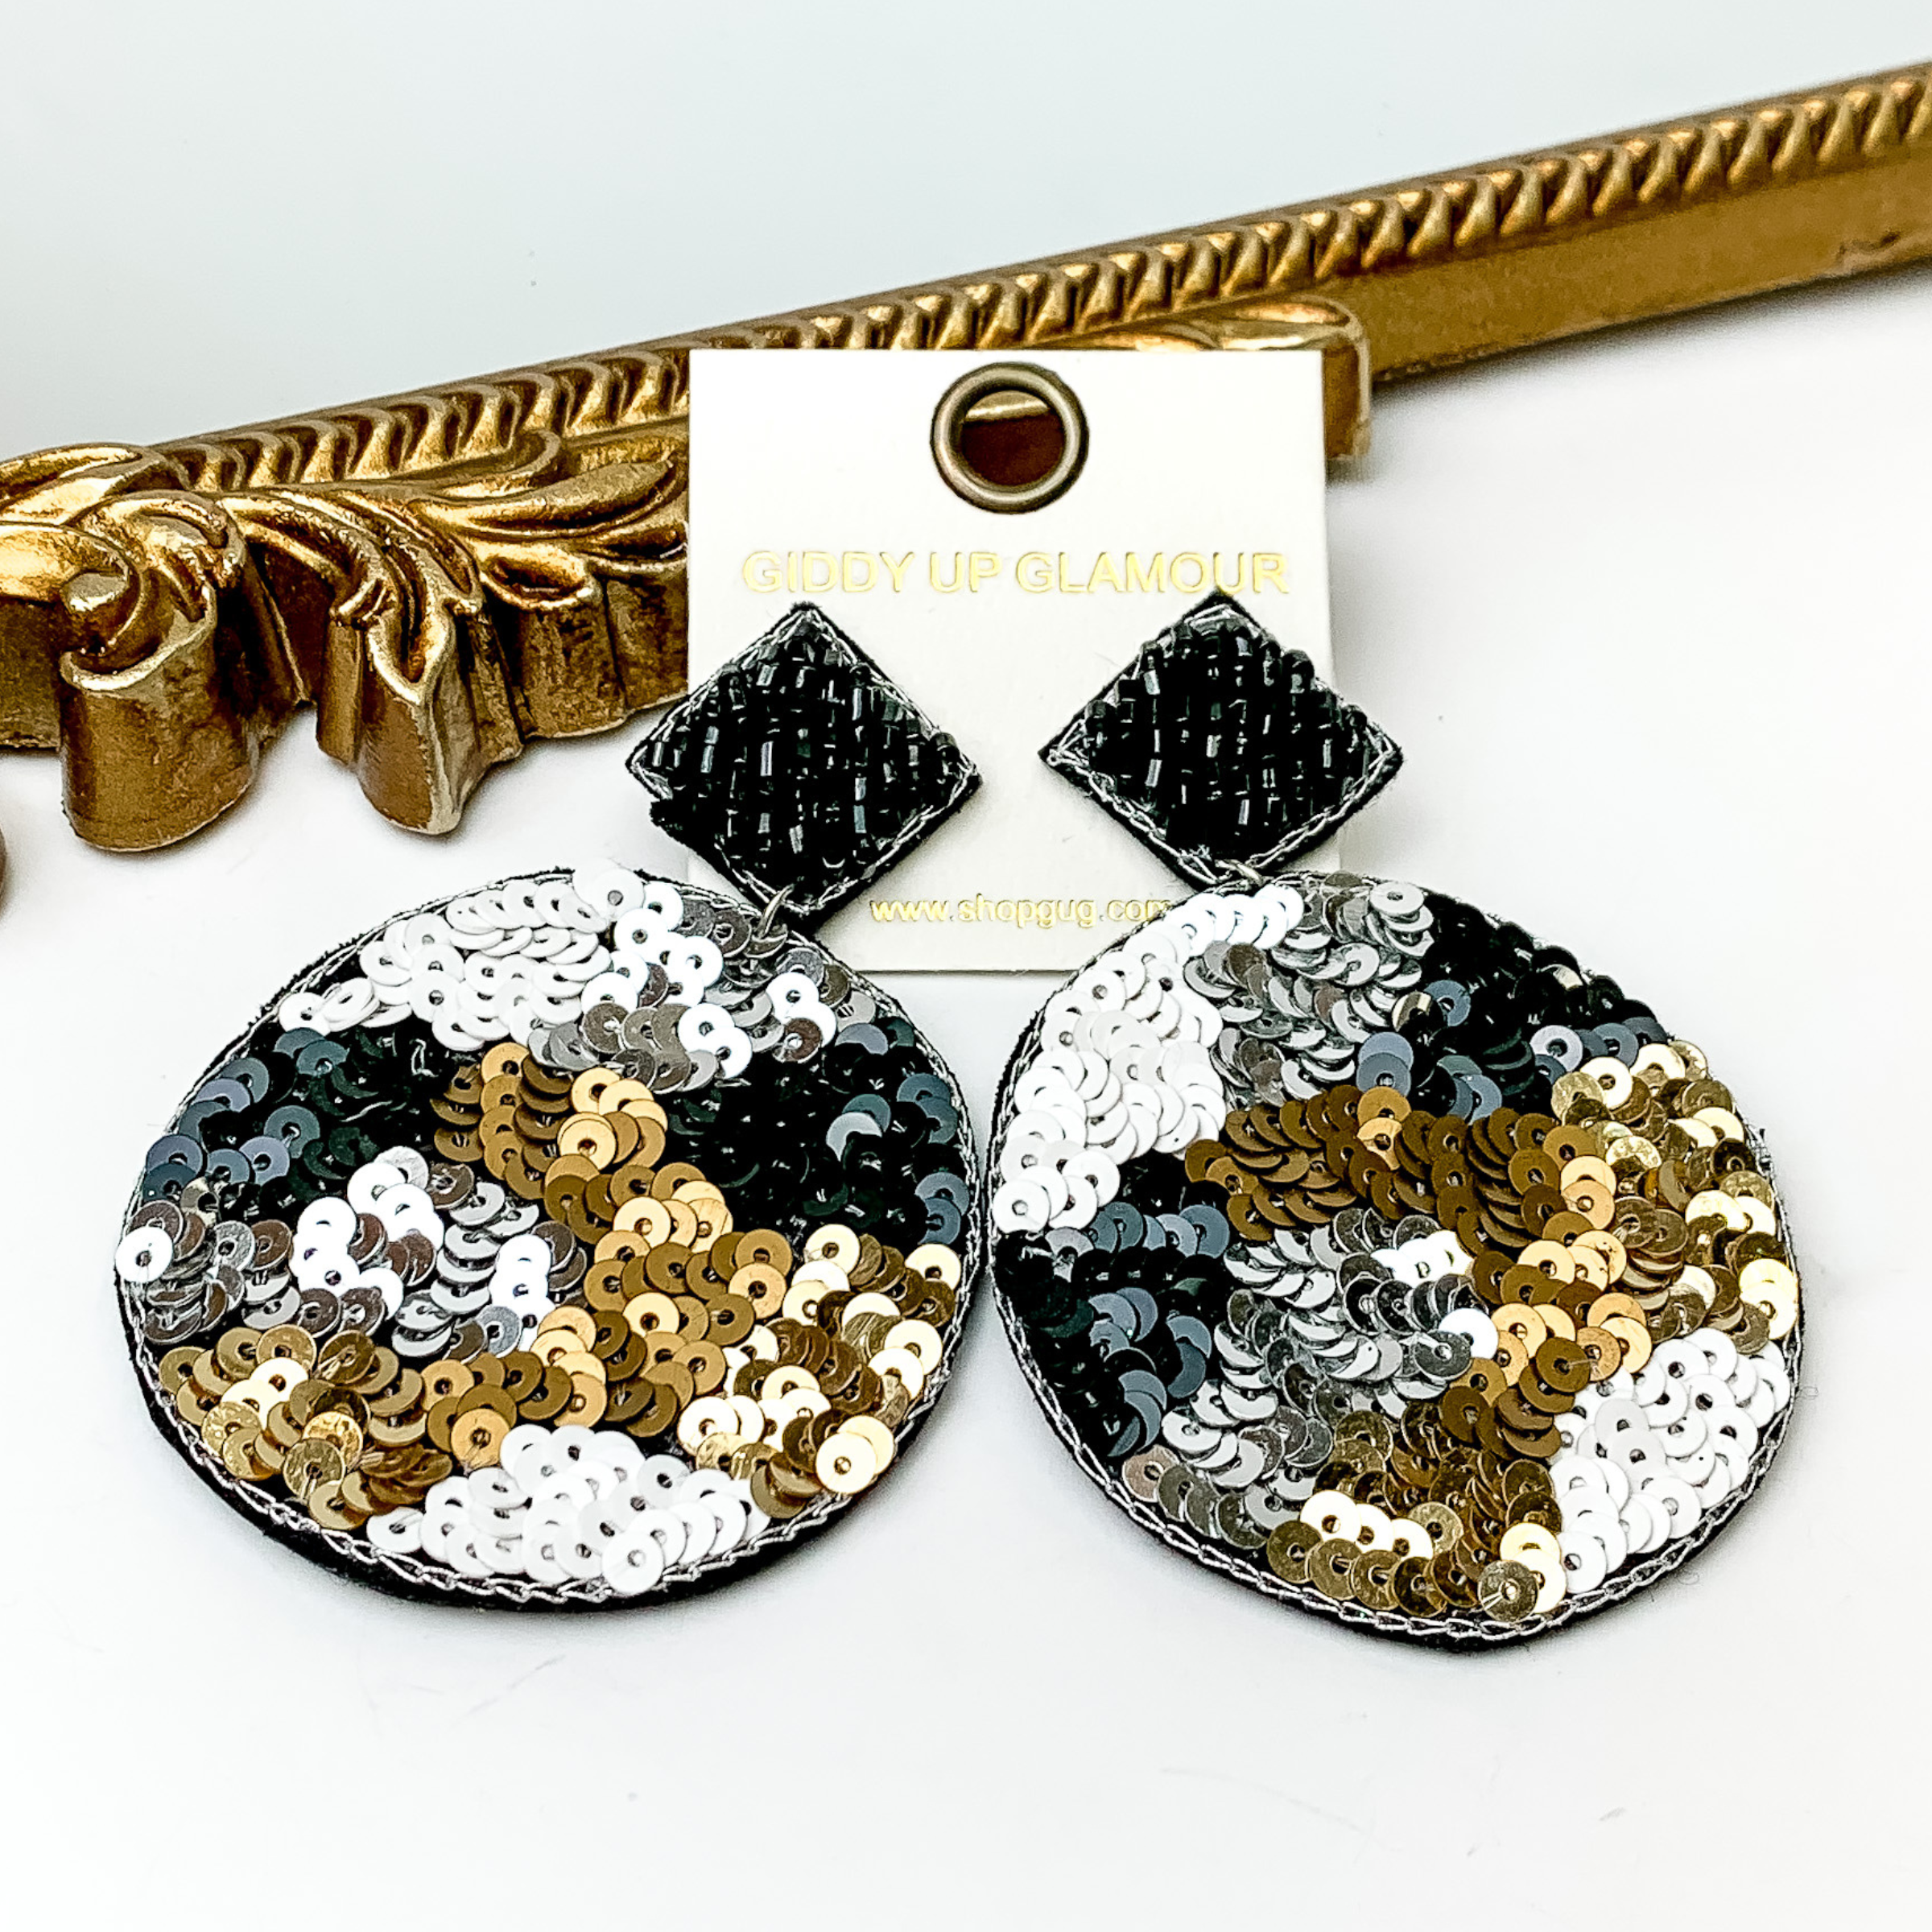 These are diamond post back, black beaded earrings with a sequin beaded circle drop. These earrings include random spot pattern with bronze sequins, white sequins, silver sequins and black sequins. These earrings are pictured in front of a gold mirror on a white background. 